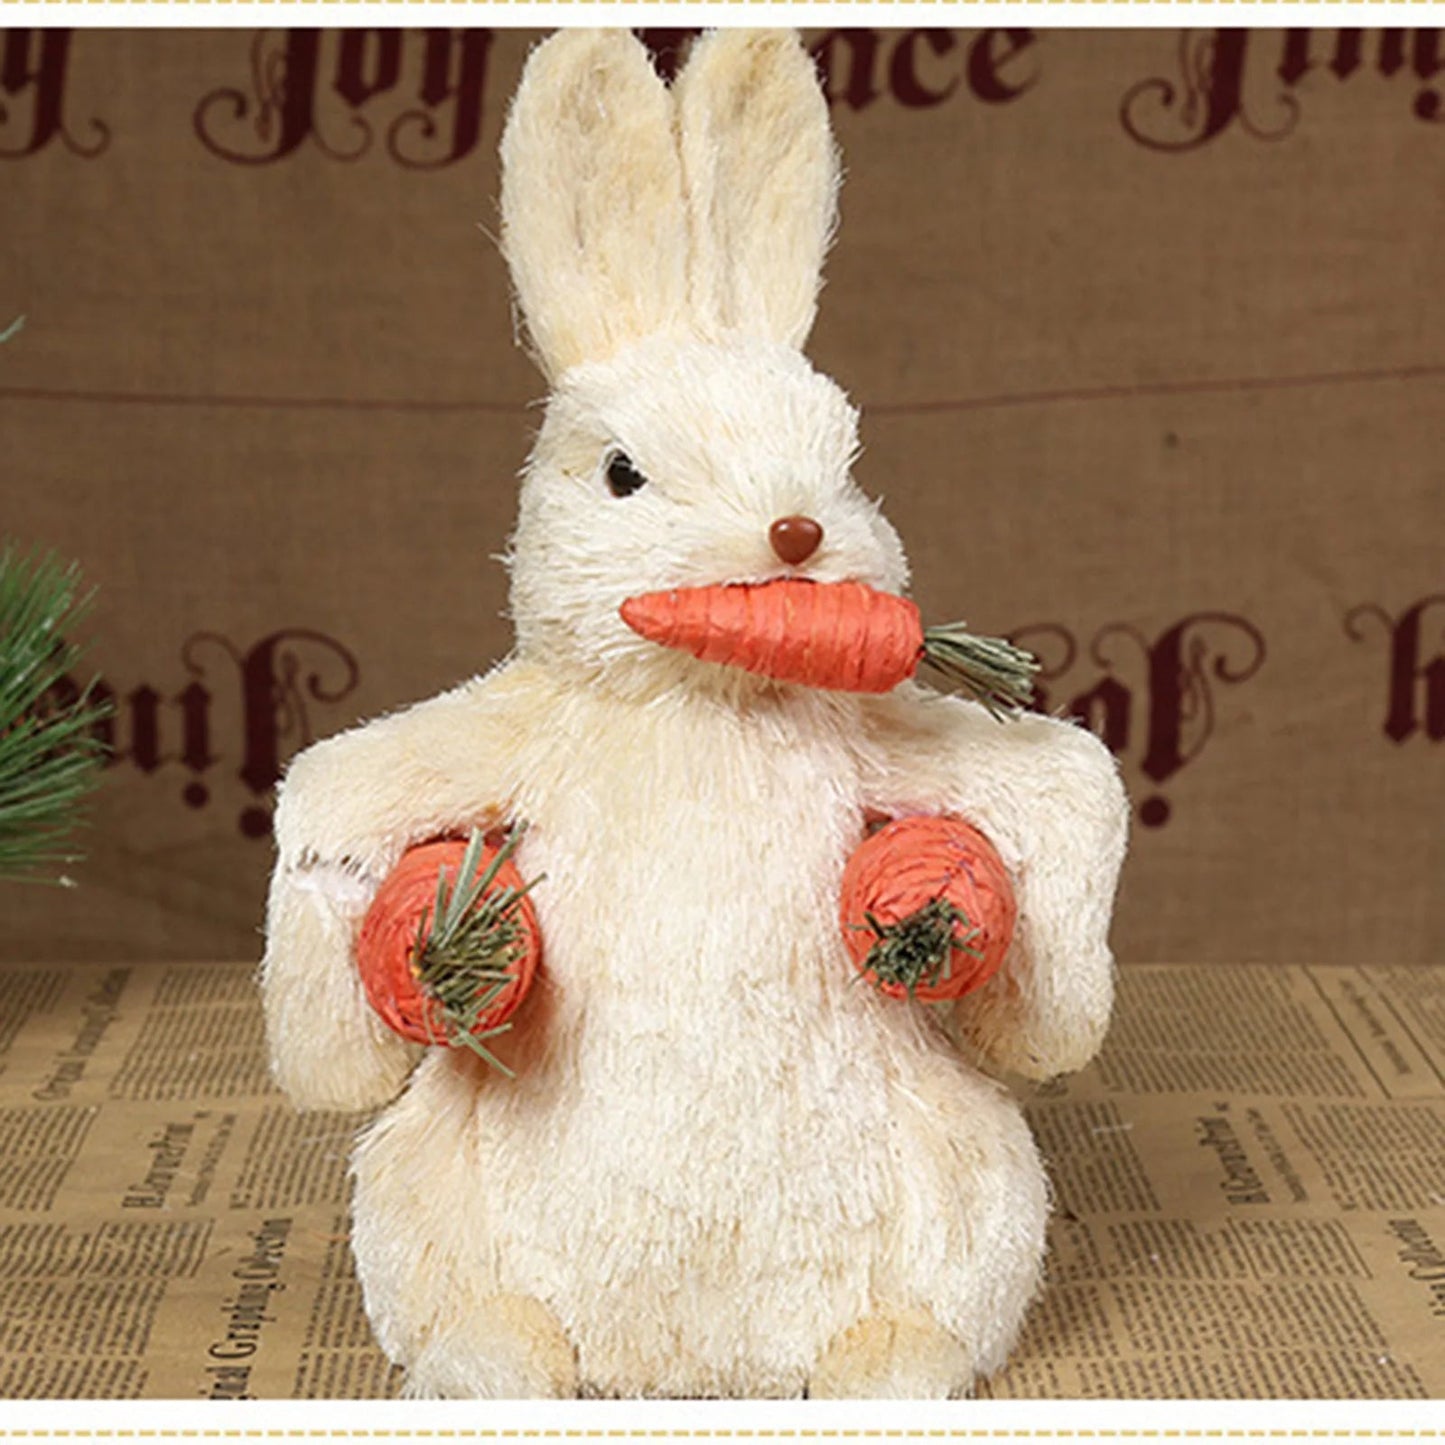 Cute Easter Bunny made from Straws [SELECTION]-ALOE WINGS STORE